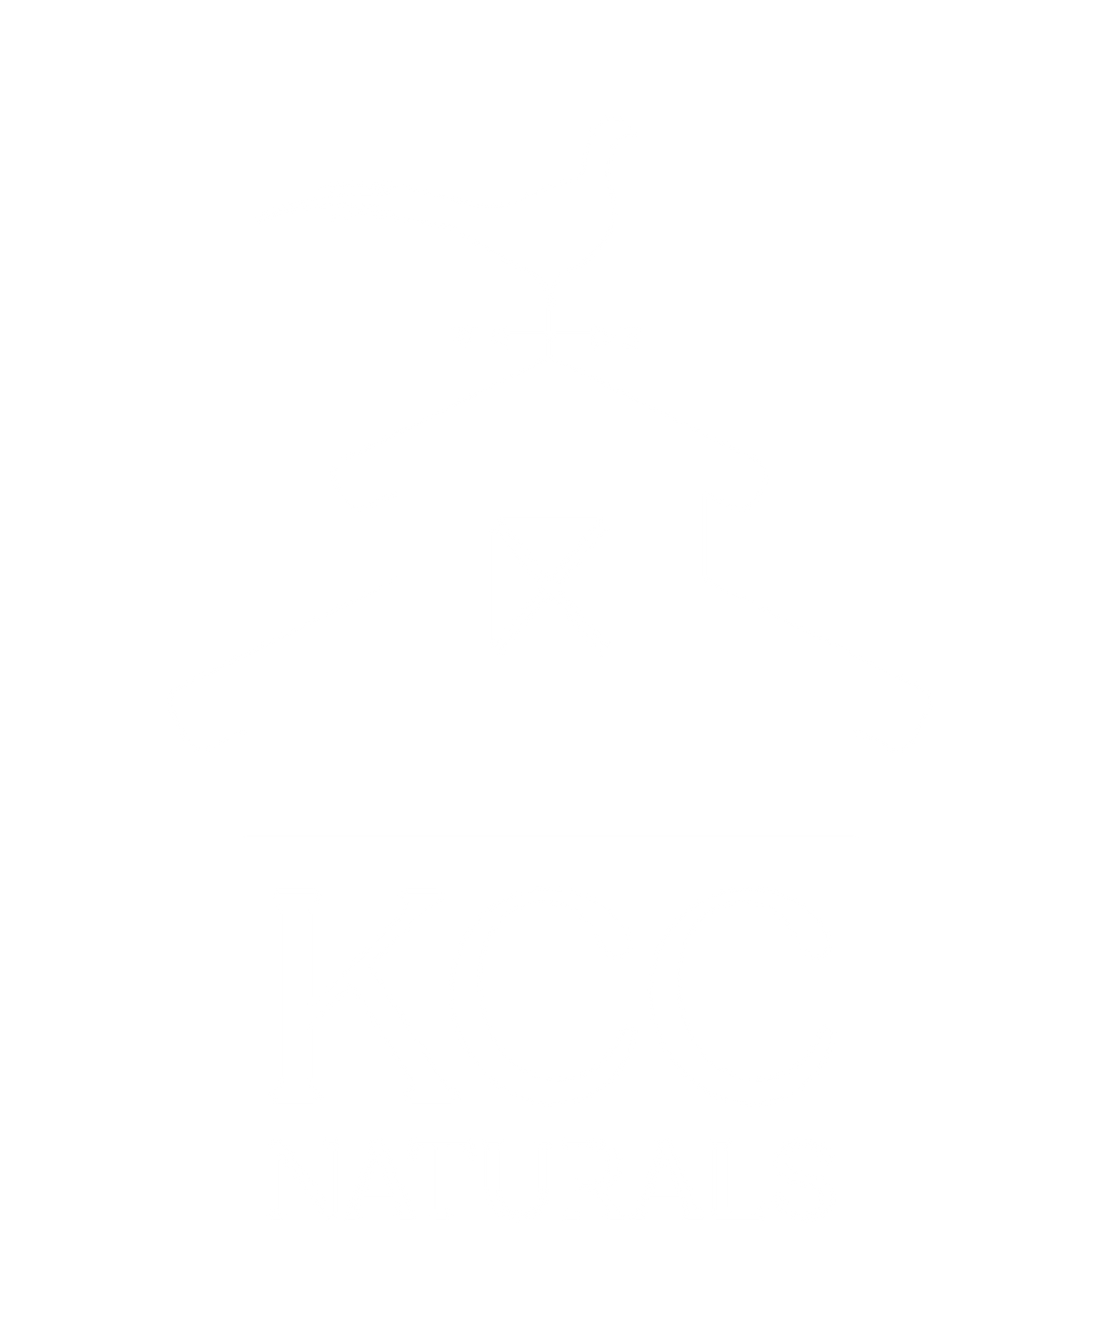 KCC Naturals Logo has a pheasant cupola atop a barn which sits on top of letters spelling out kcc naturals